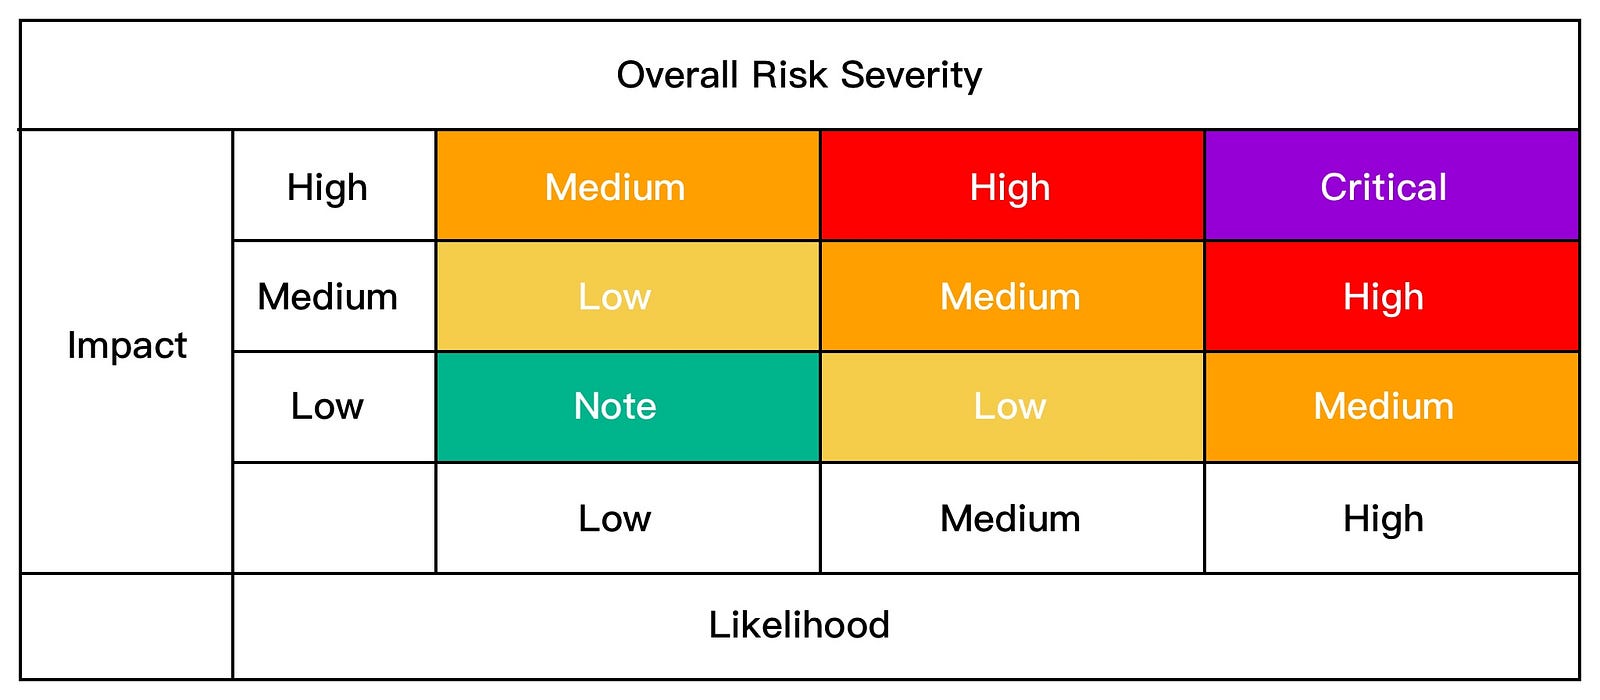 Overall Risk Severity